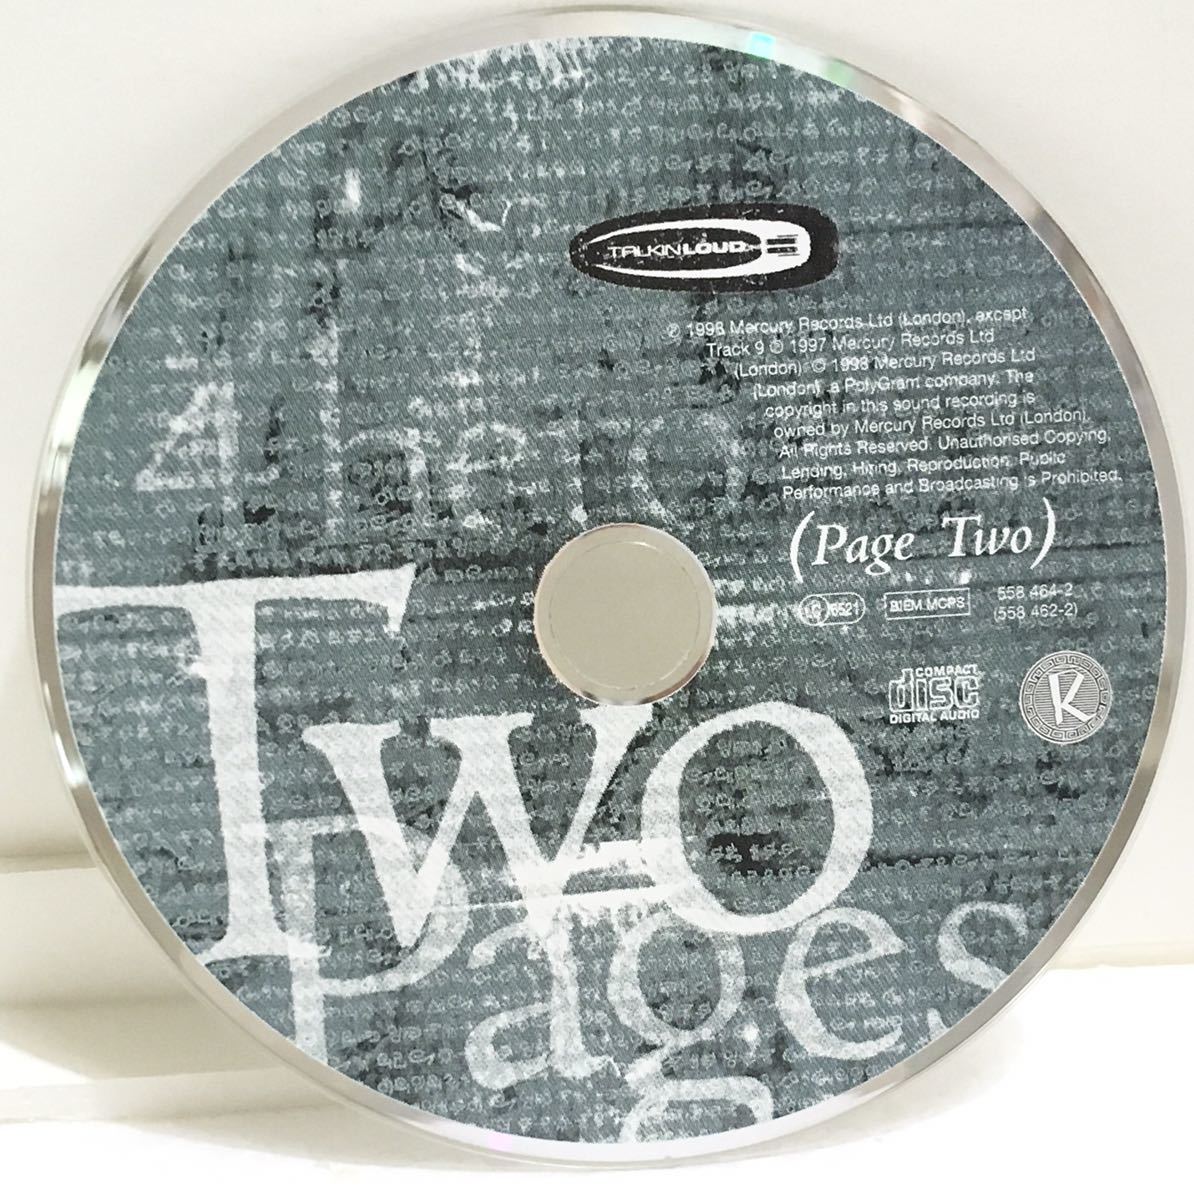 4 HERO　/　Two Pages 　　　2枚組　　　　輸入盤　　　　1998年ドラムンベースの名盤_画像4